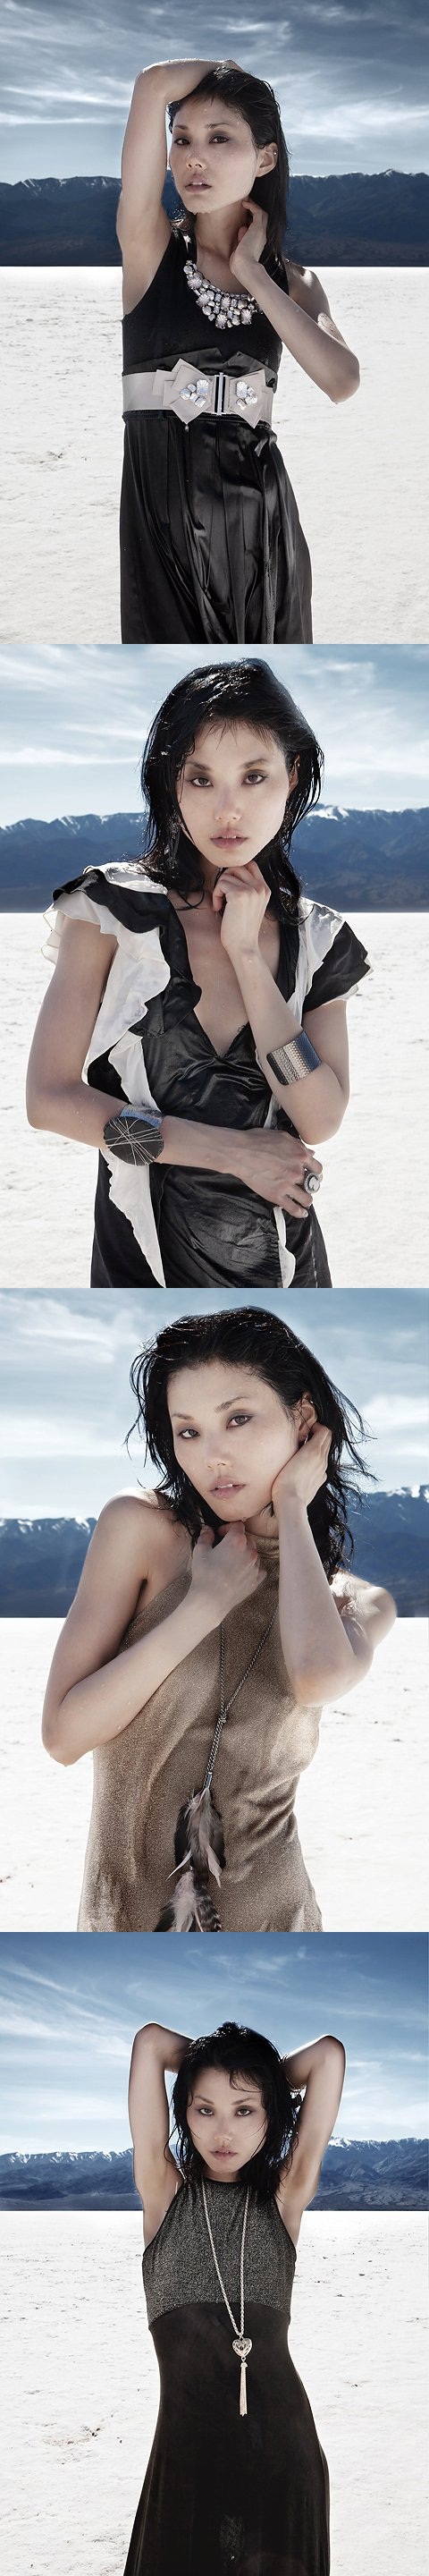 Female model photo shoot of Courtney Juarez  and Eriko_Y by Niccolo Chimenti PH in Death Valley Dry Salt Lake Beds, wardrobe styled by Courtney Juarez 